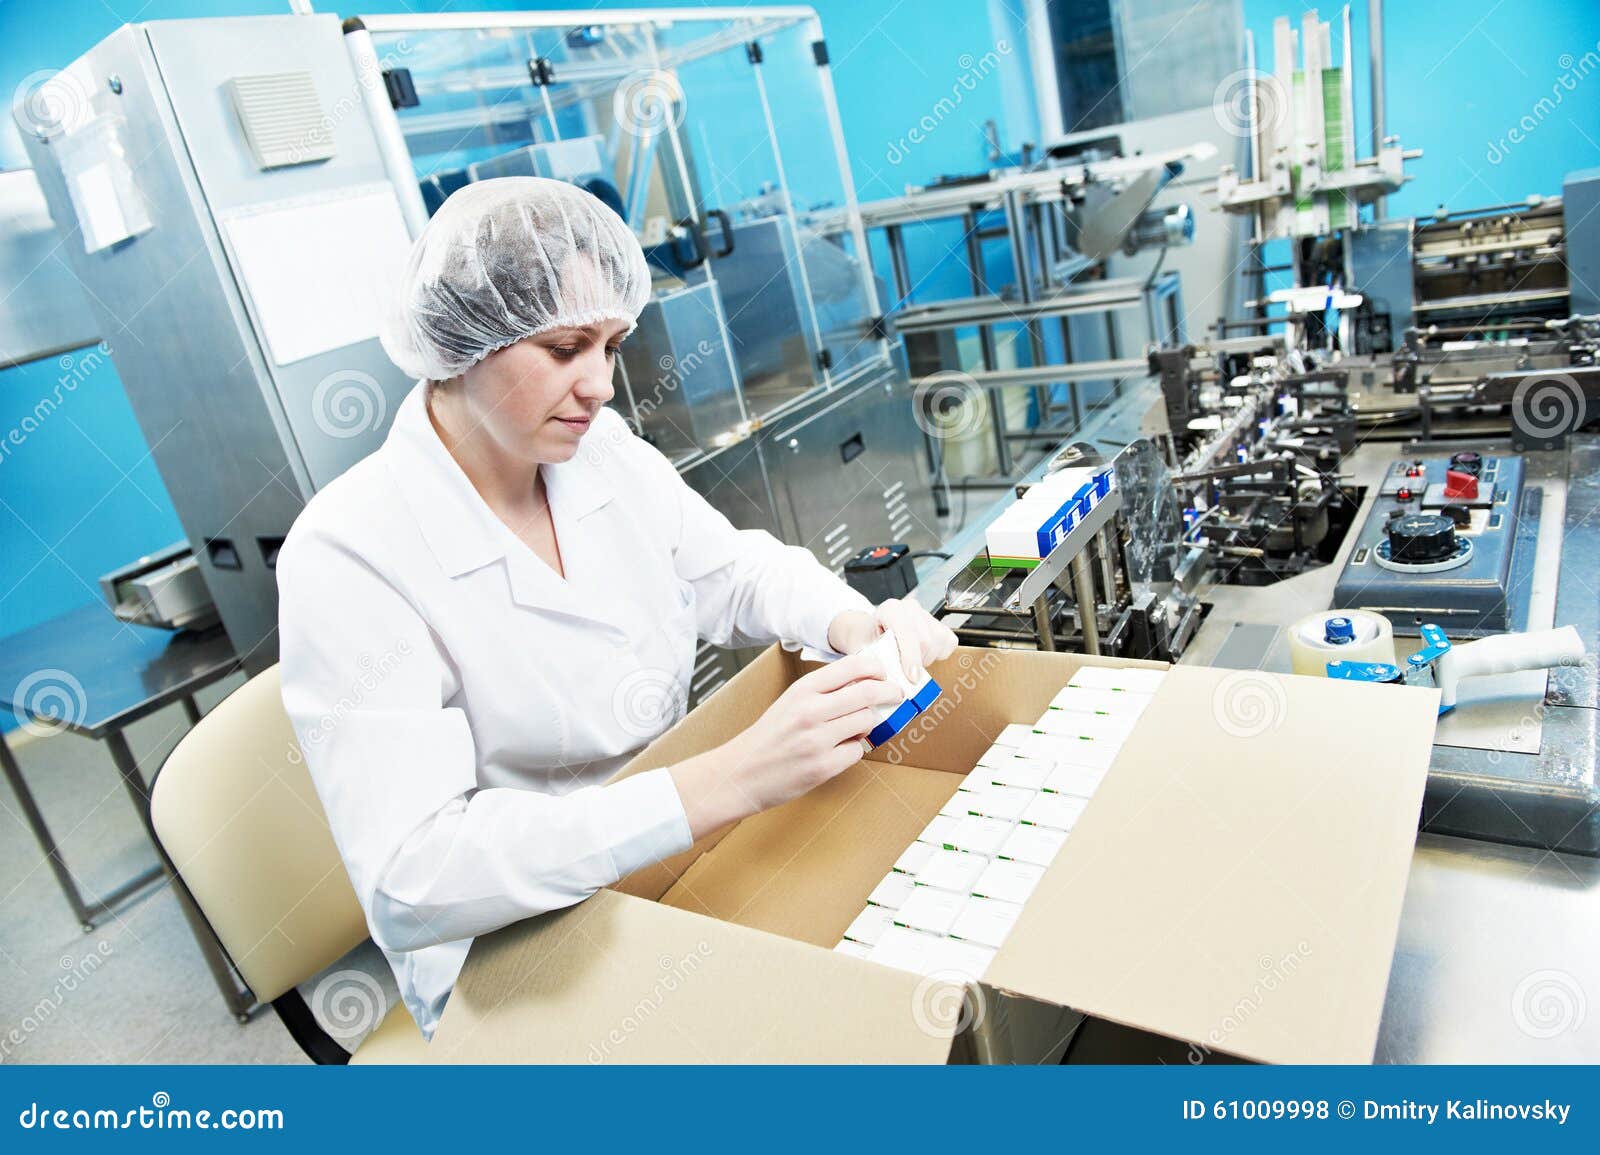 pharmaceutical industrial factory worker